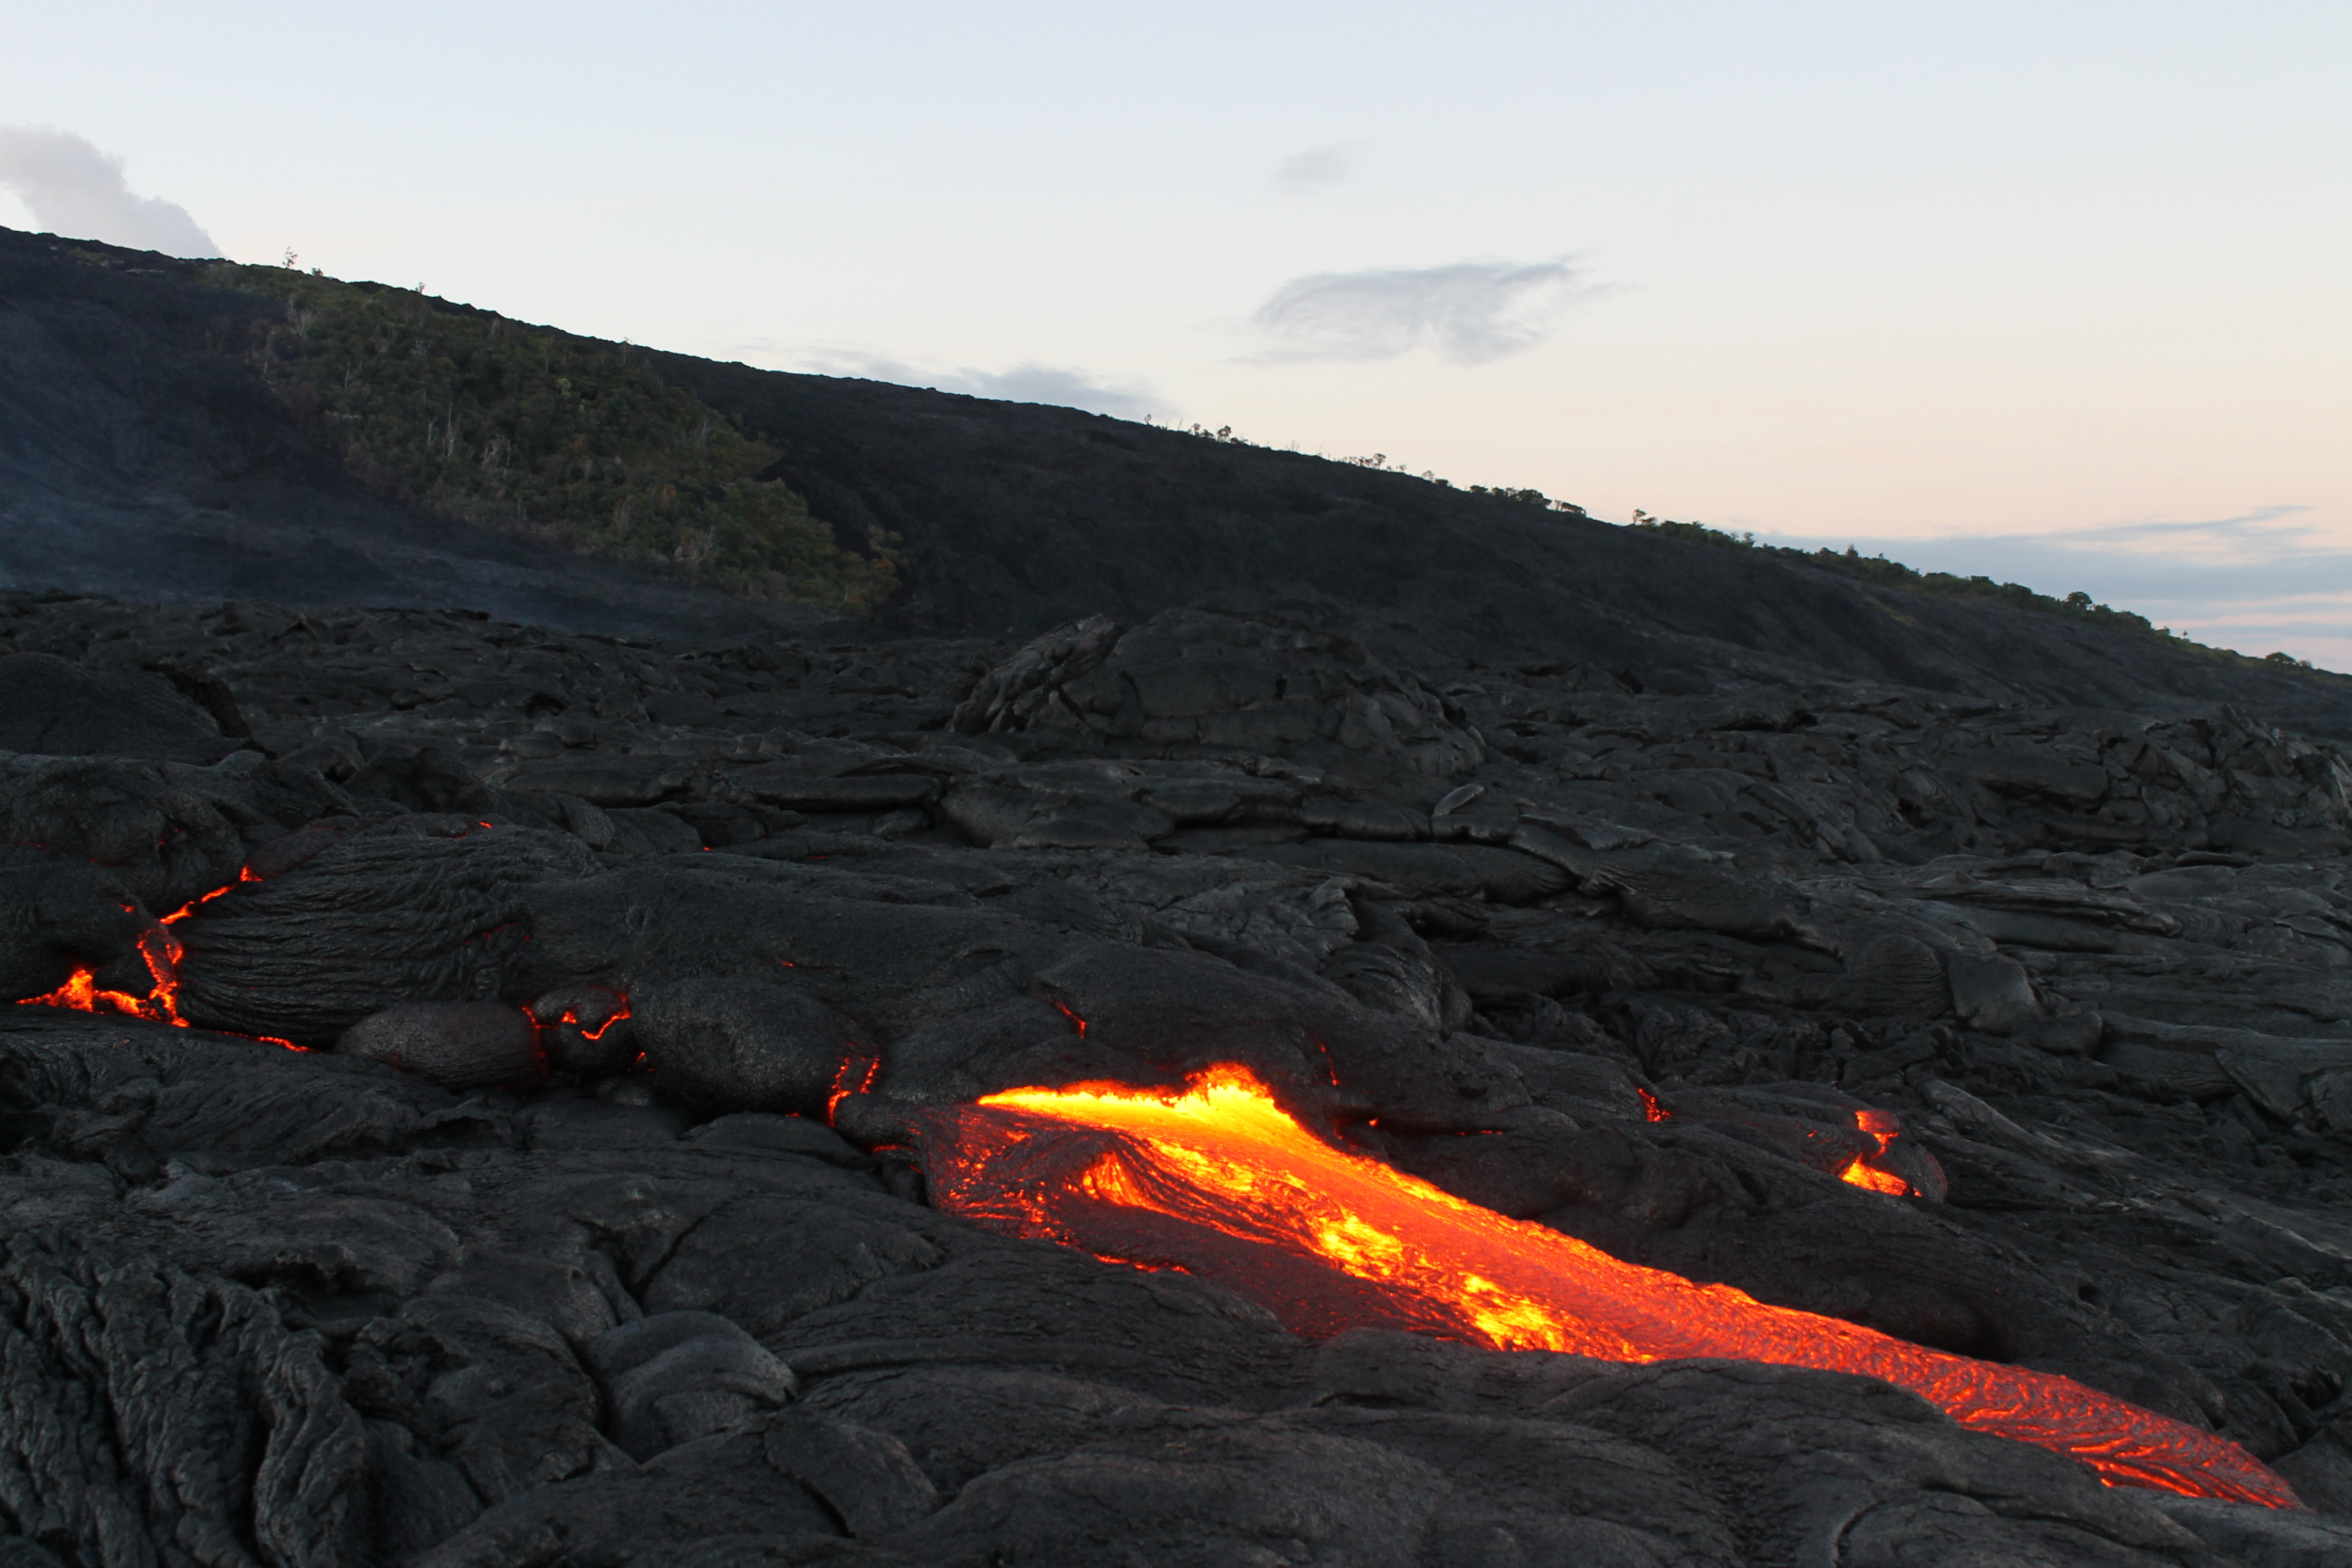 Why Hawaii's hot lava is so awe-inspiring | MNN - Mother Nature Network